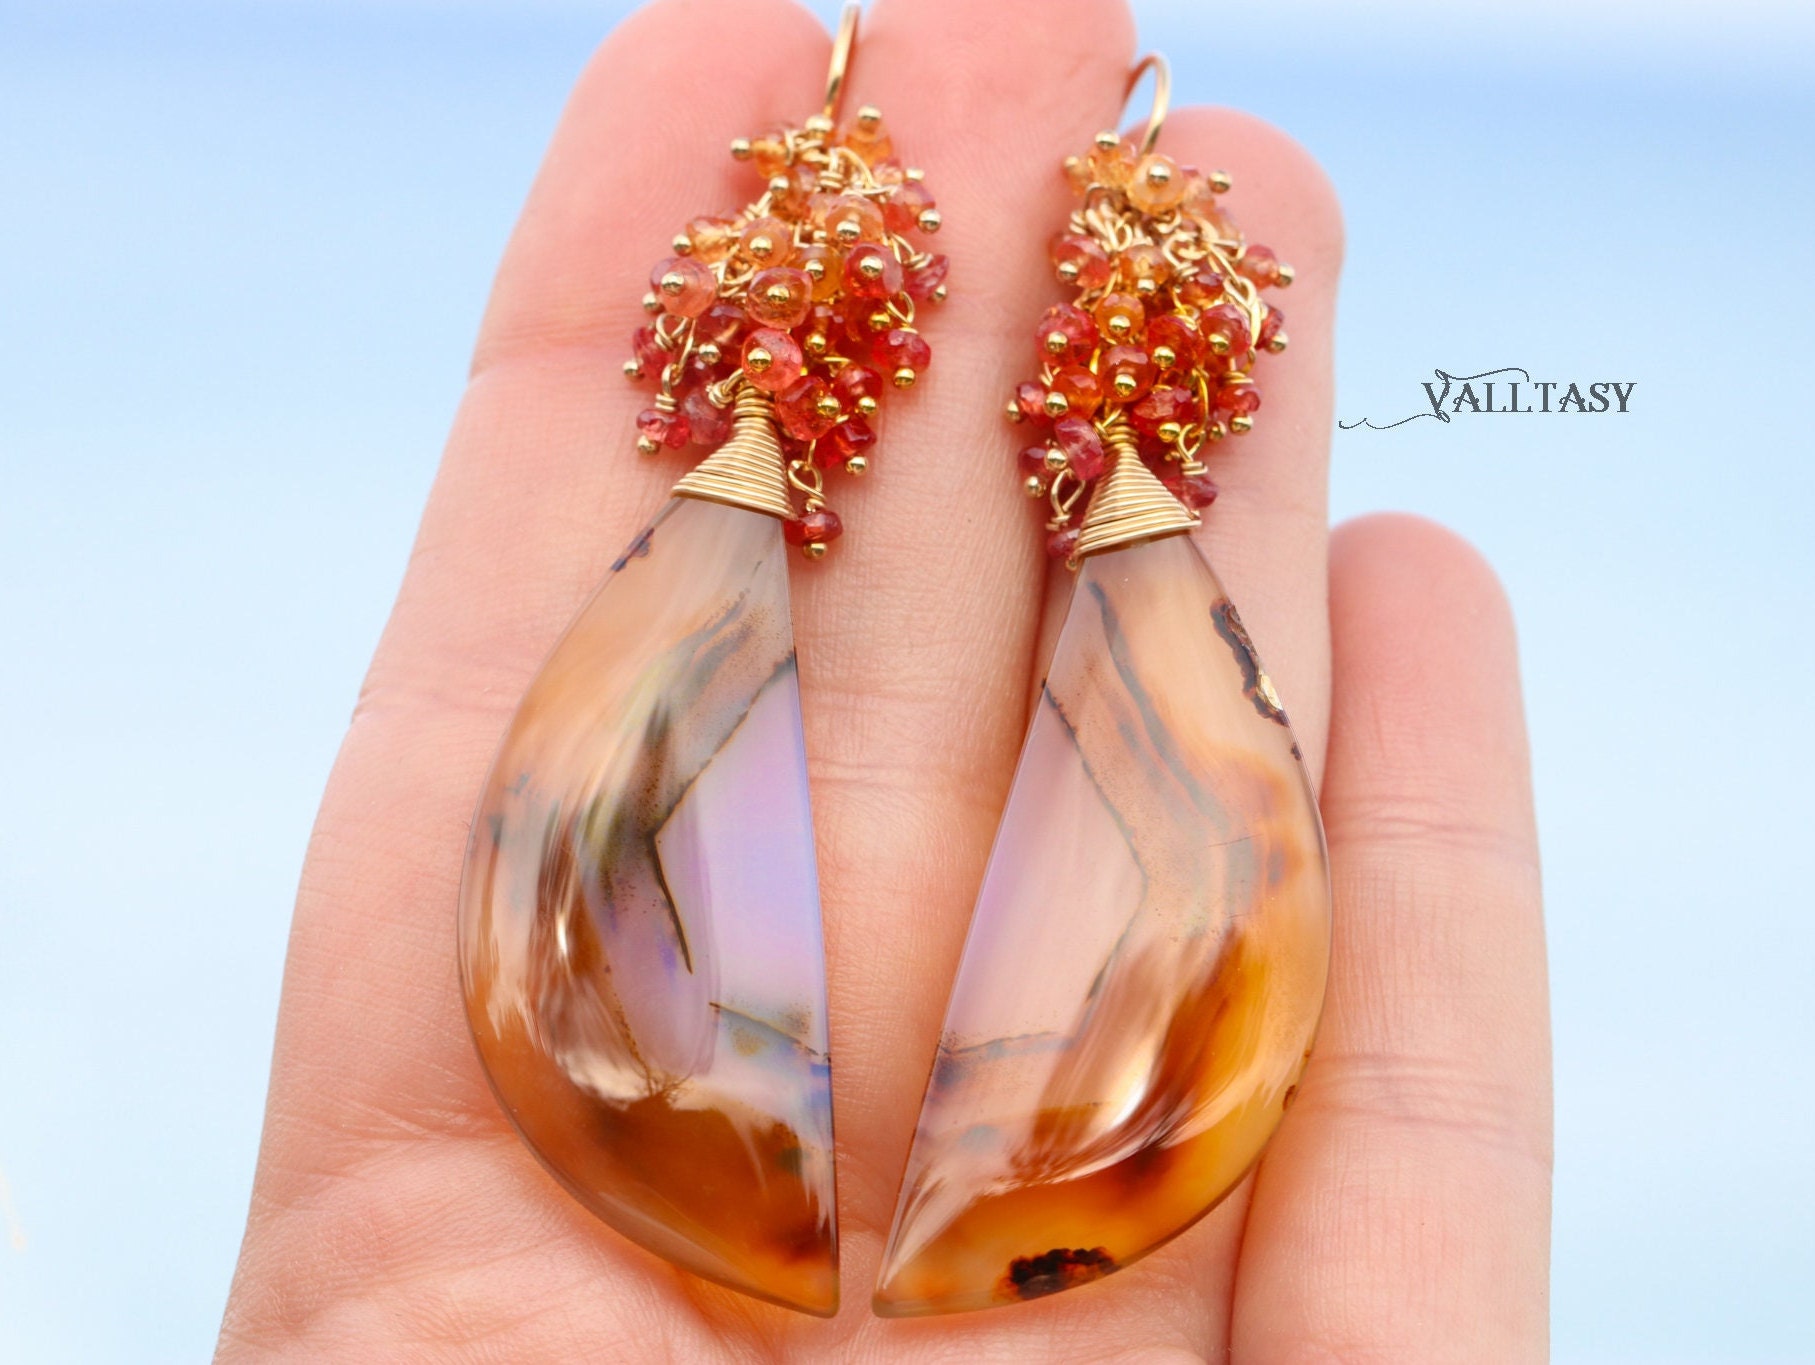 Montana Agate and Padparadscha Sapphire Earrings in Gold Filled, One of a Kind